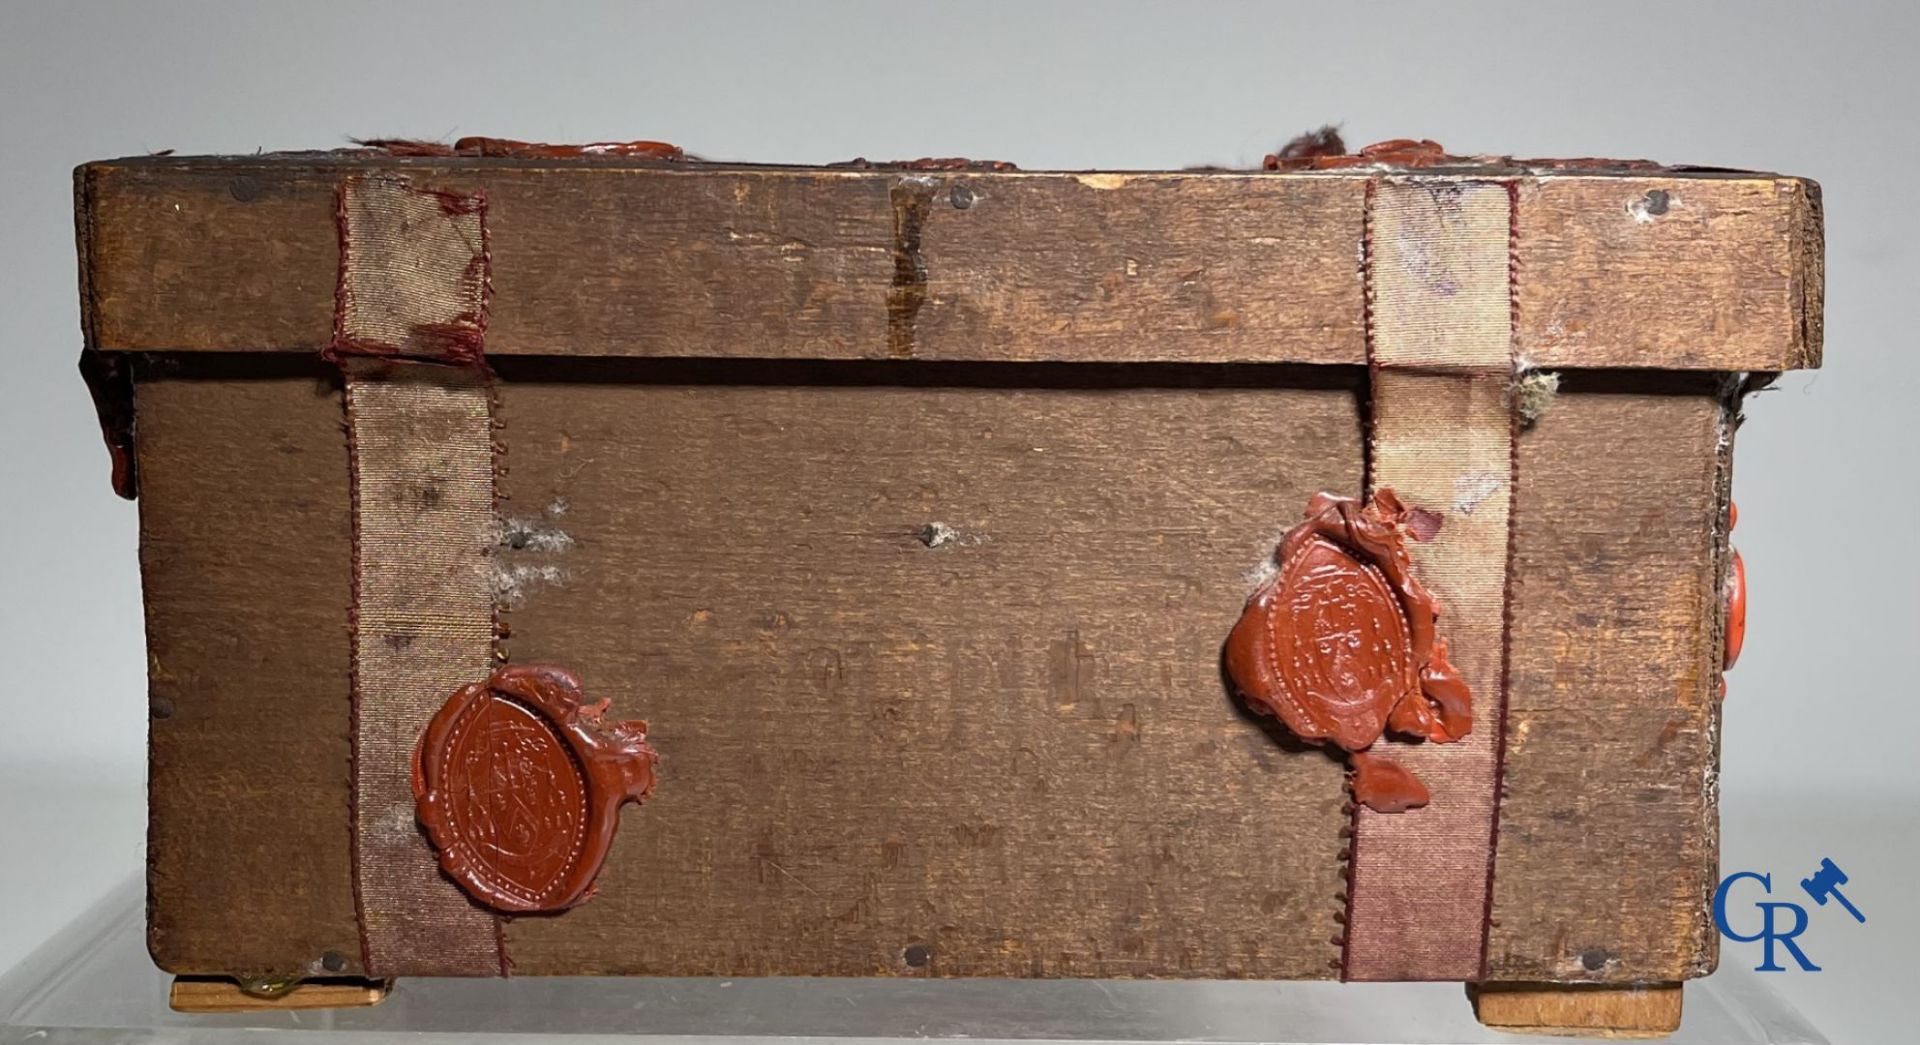 An antique wooden reliquary sealed with wax seals. Early 19th century. - Image 11 of 15